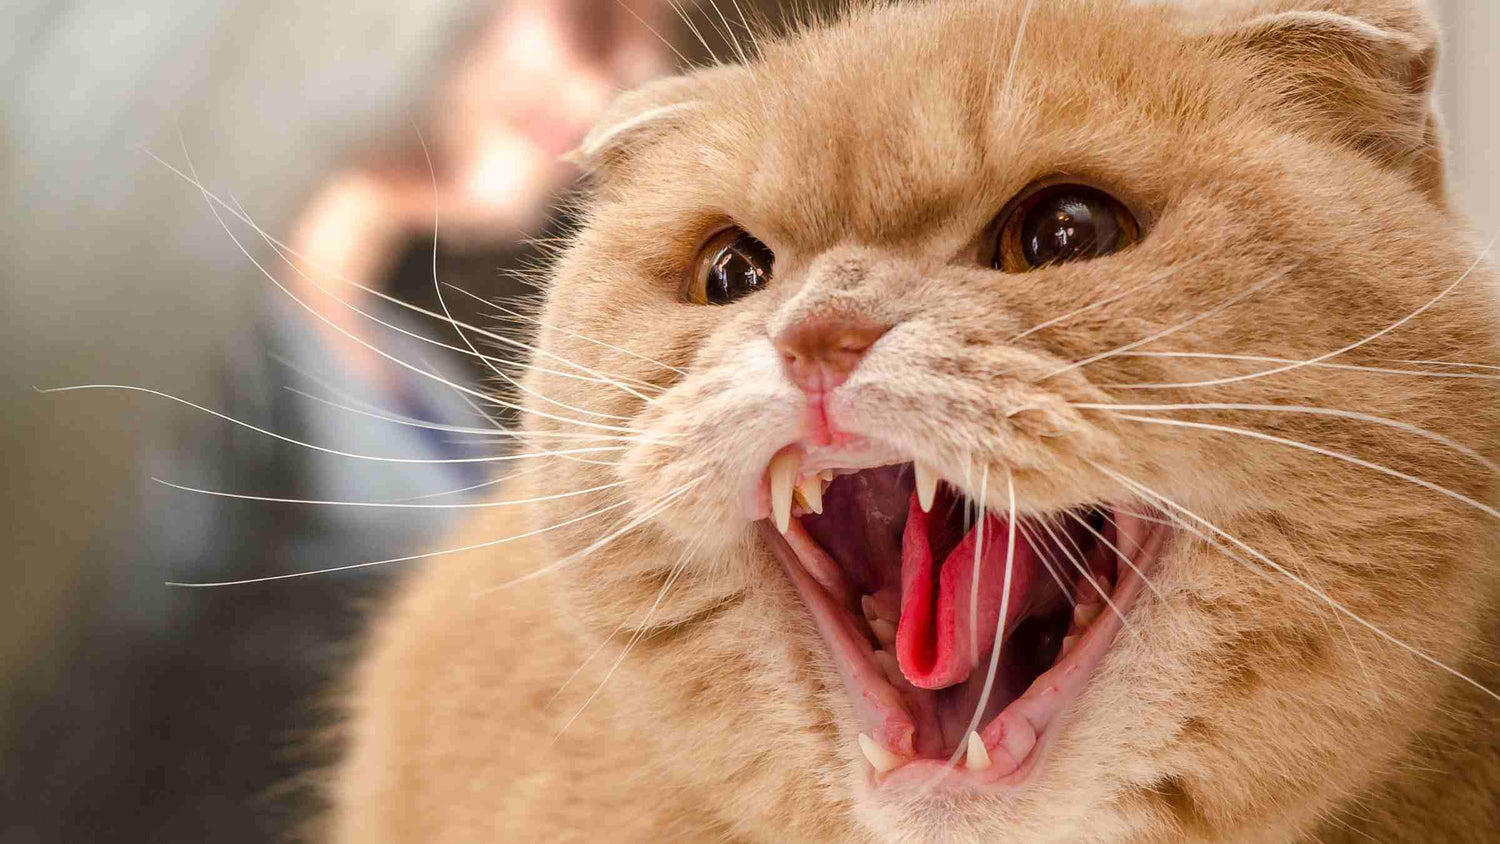 What’s your cat trying to tell you? Close-up of an angry golden British Shorthair cat with its mouth open, showing teeth and an aggressive expression.